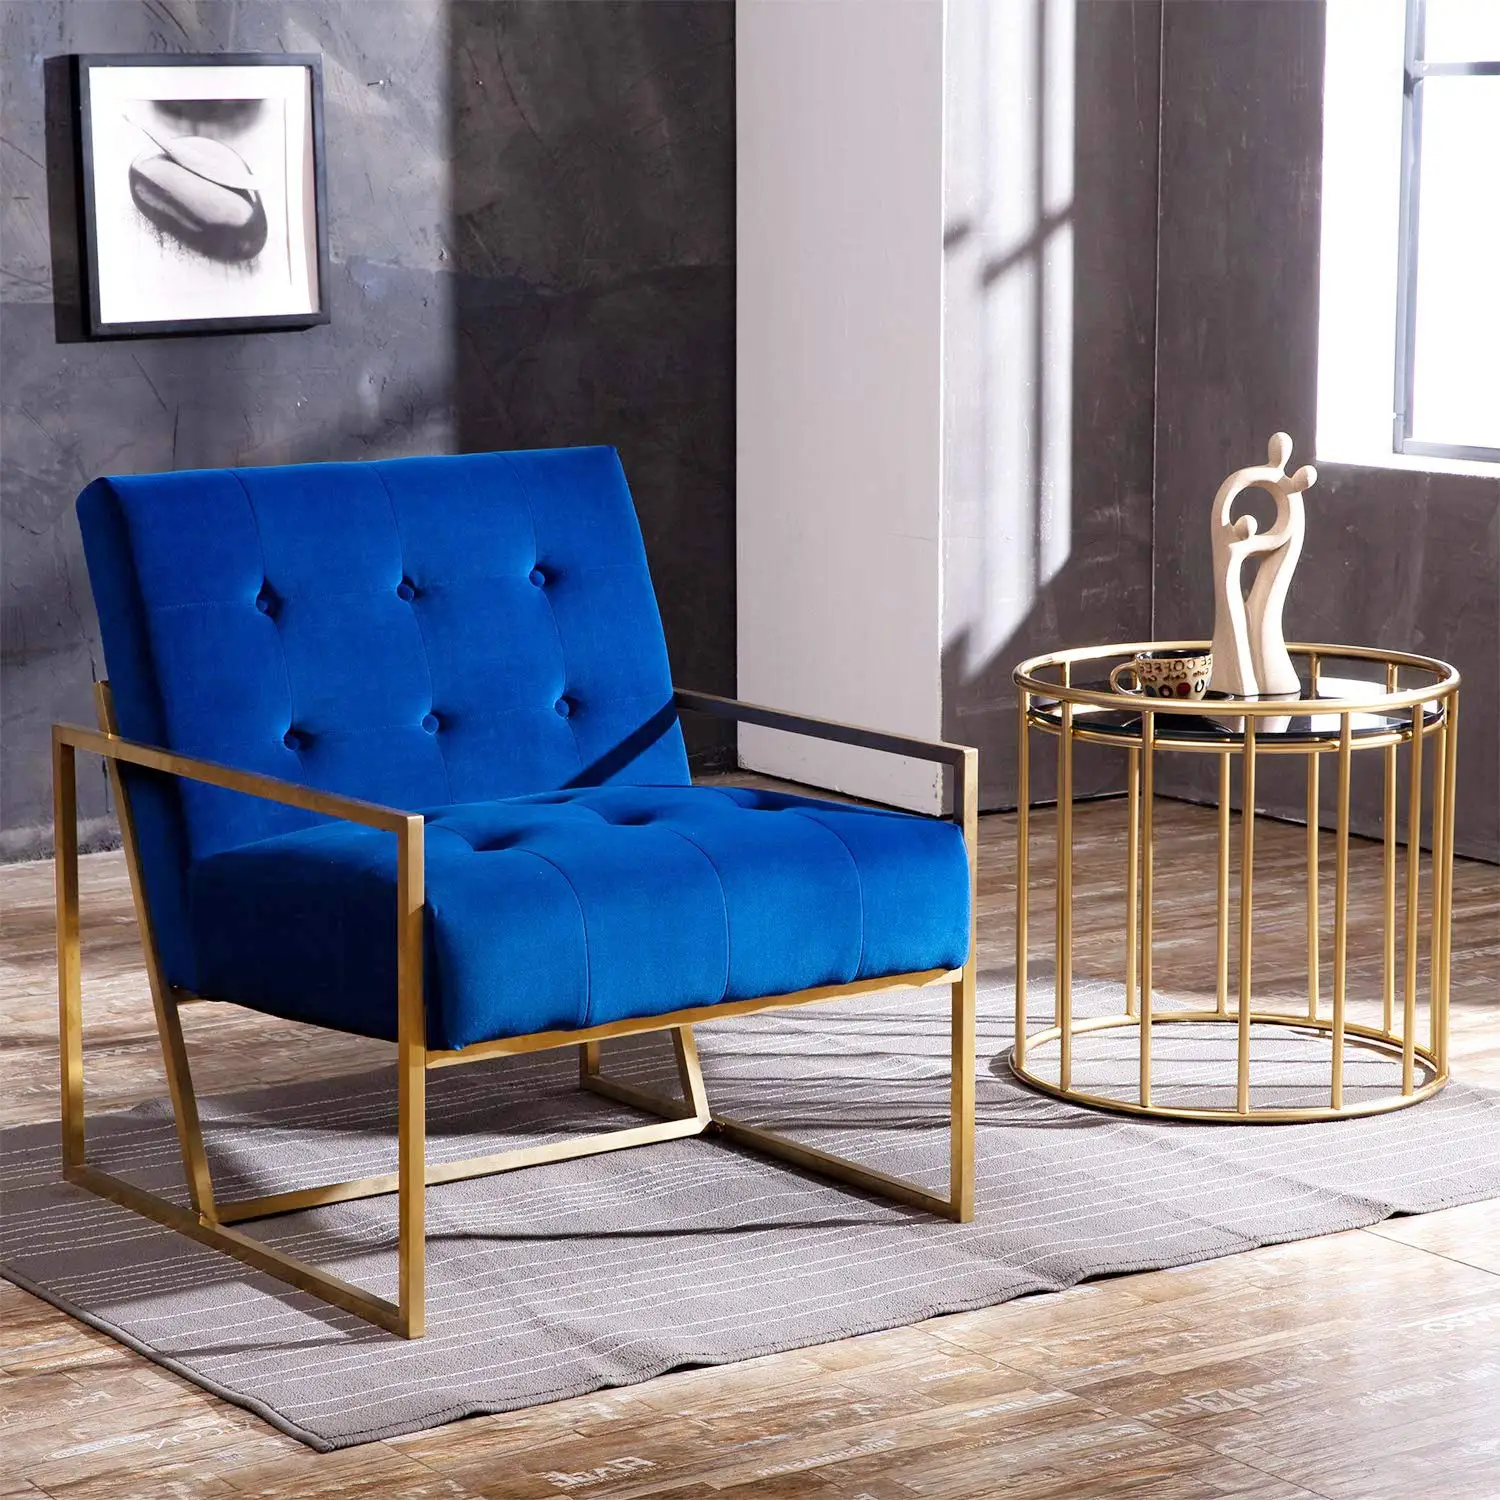 Modern Living Room Chairs Upholstery Navy Velvet Tufted Designer Accent Chairs Golden Fabric Lounge Chair Metal Buy Upholstered Armchair